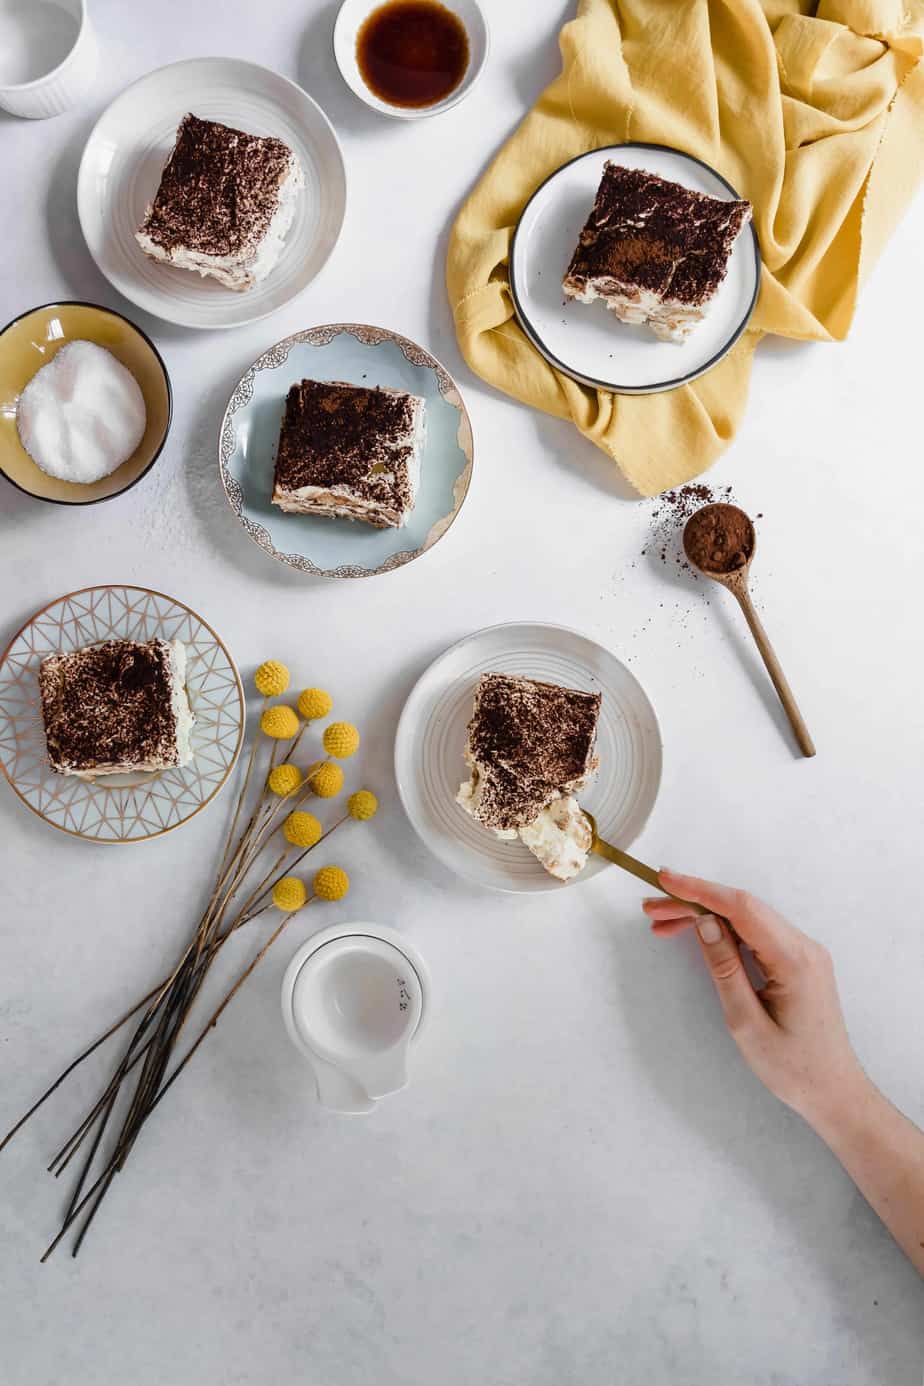 plates of healthy tiramisu with flowers and cocoa powder.